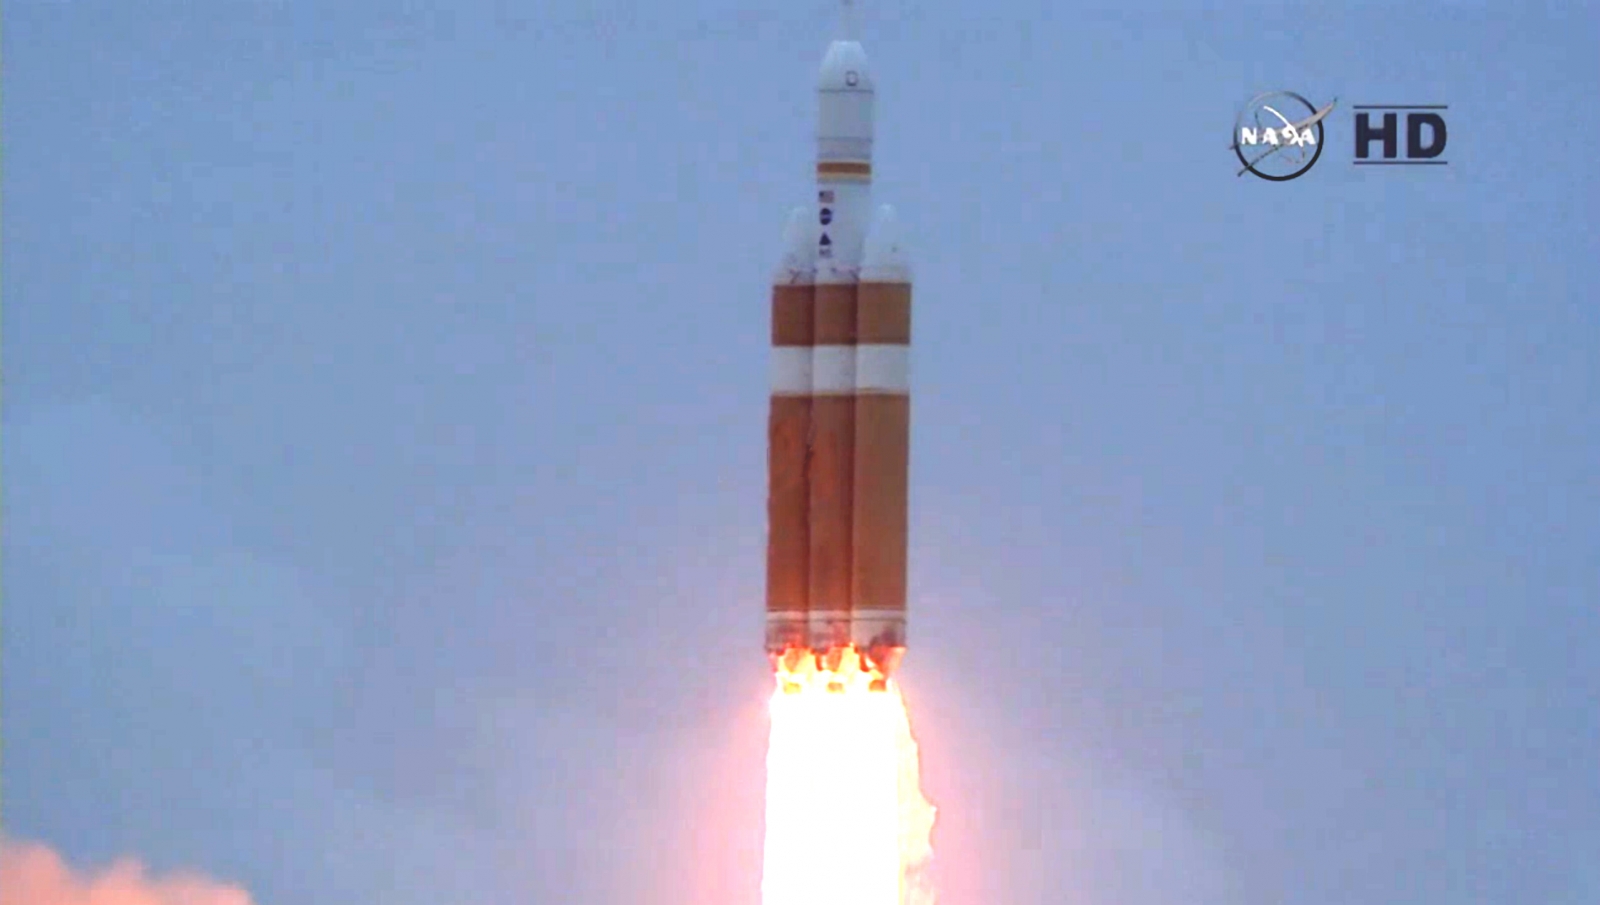 Nasa test flight: 'Dawn of Orion' launch into space successful on second attempt1600 x 905